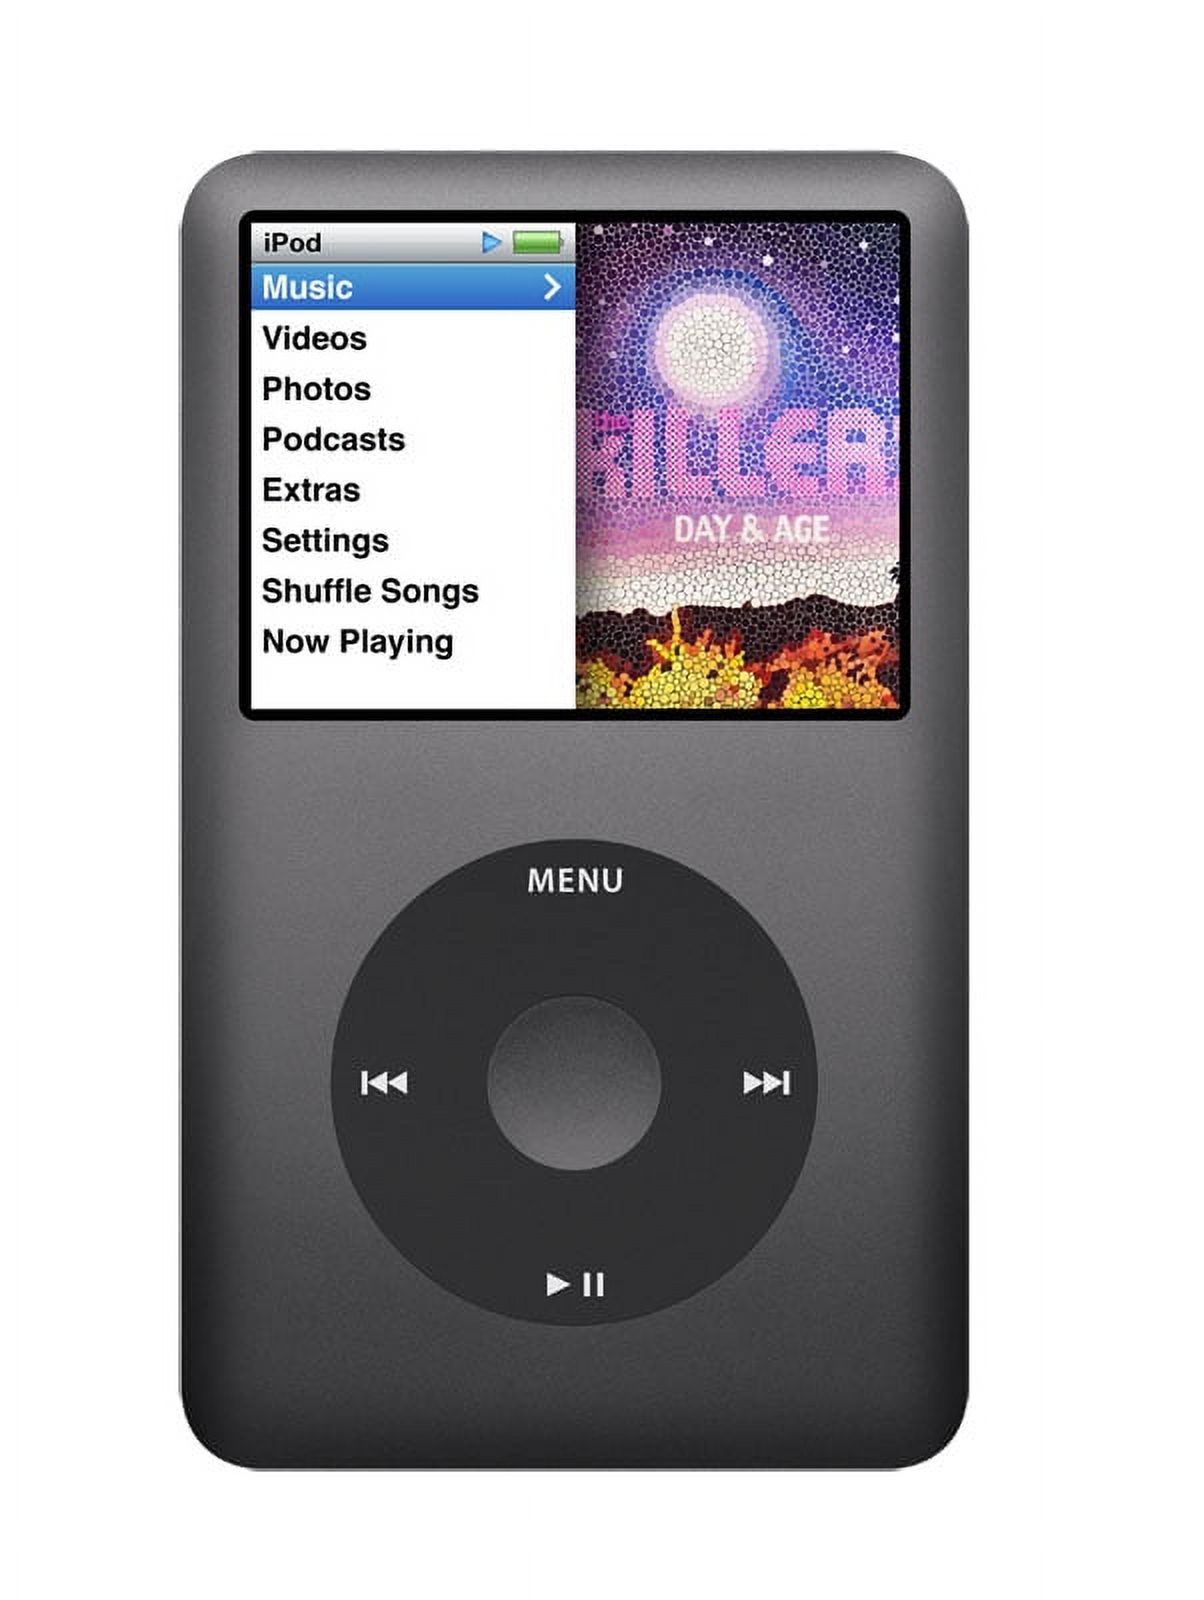 Apple 7th Generation iPod 160GB Black Classic| MP3 Audio/Video Player | Like New - image 1 of 5